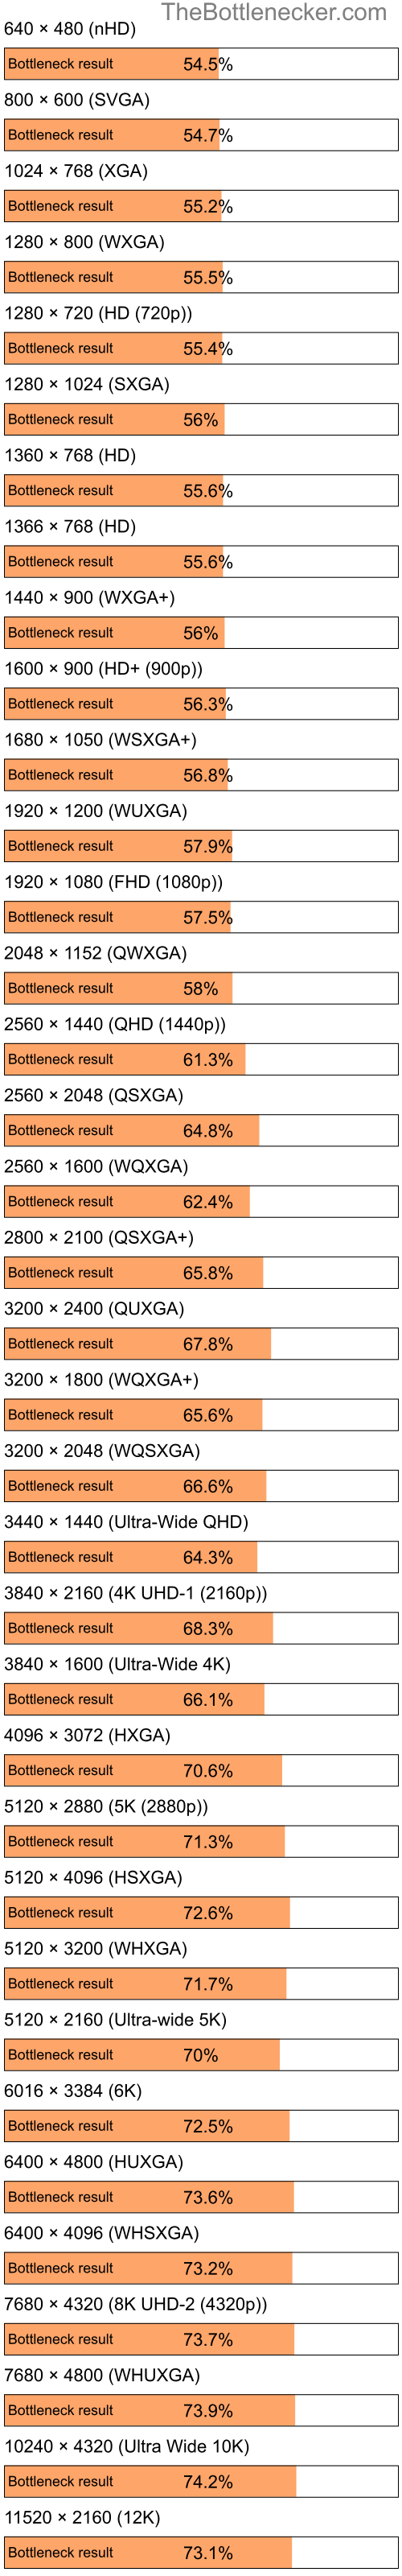 Bottleneck results by resolution for Intel Pentium 4 and AMD Radeon X700 in Processor Intense Tasks